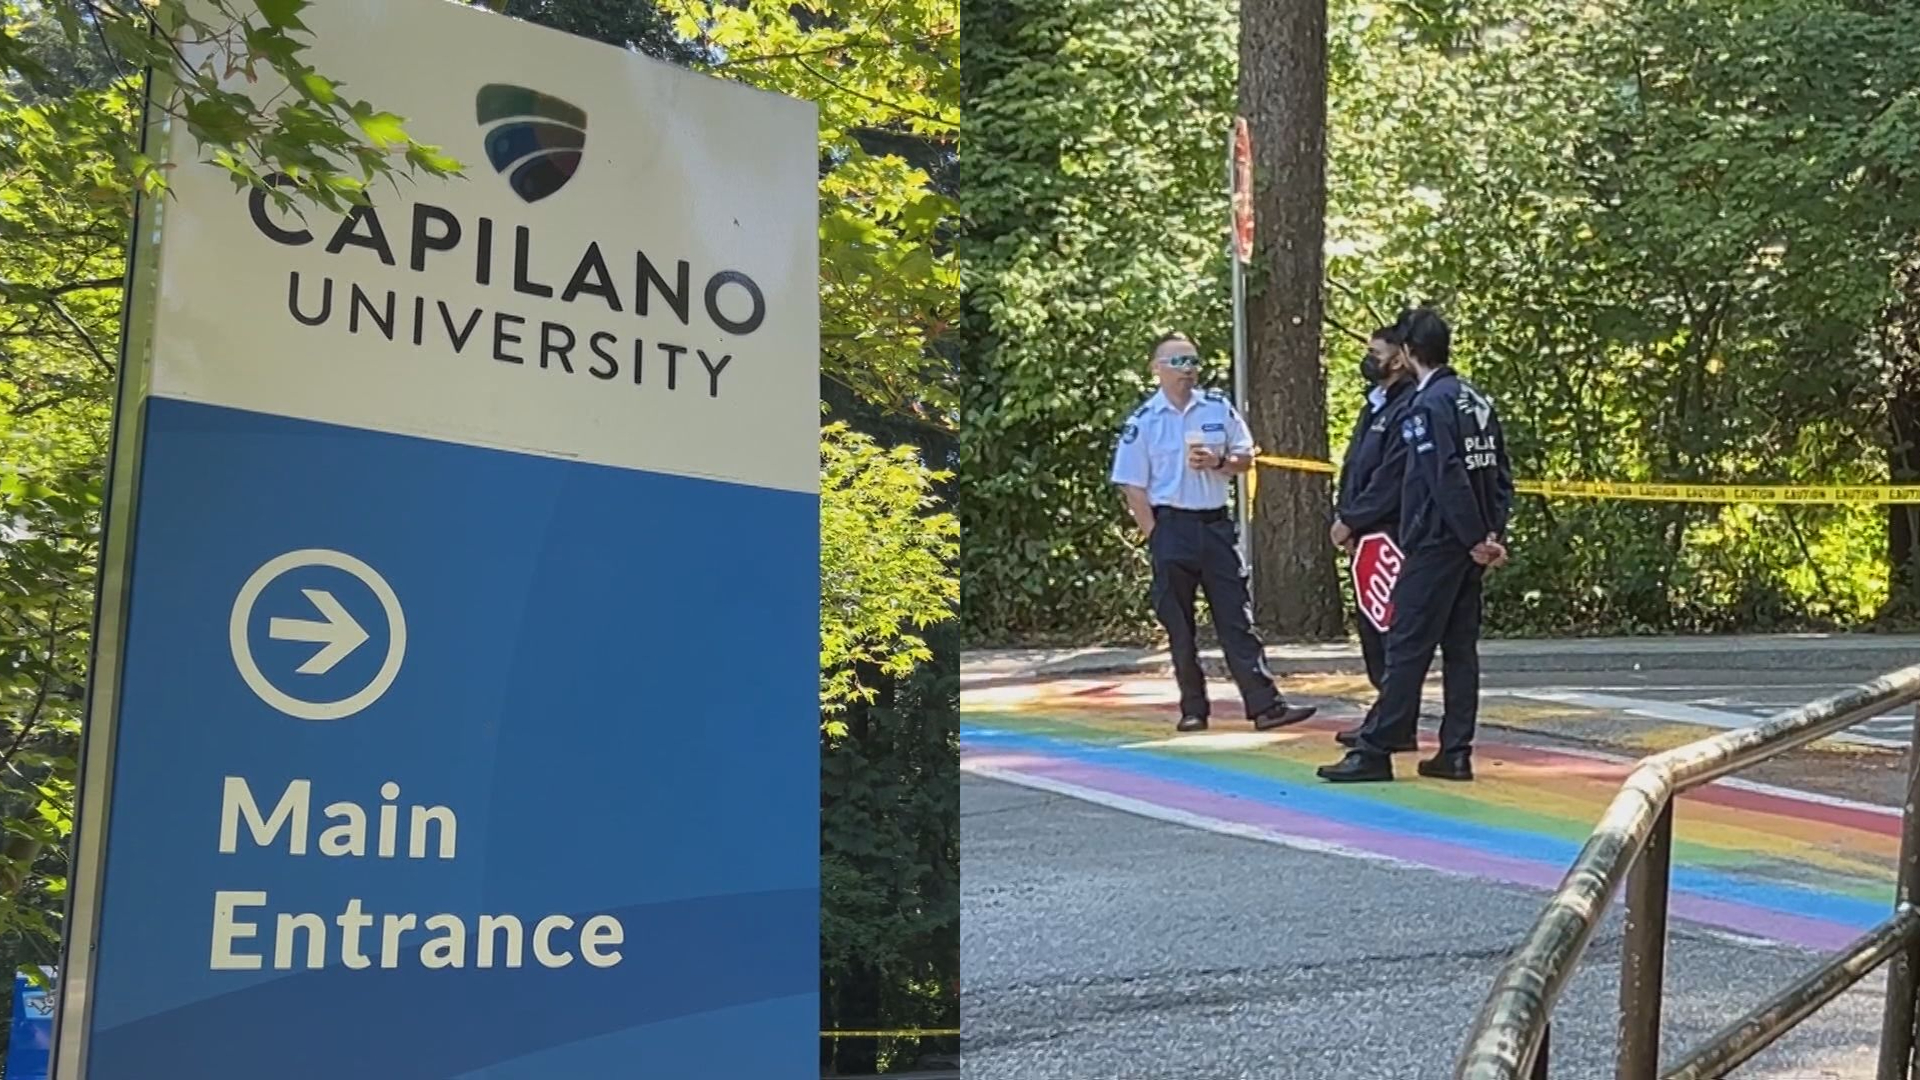 Capilano University closed Friday due to ‘targeted security threat’